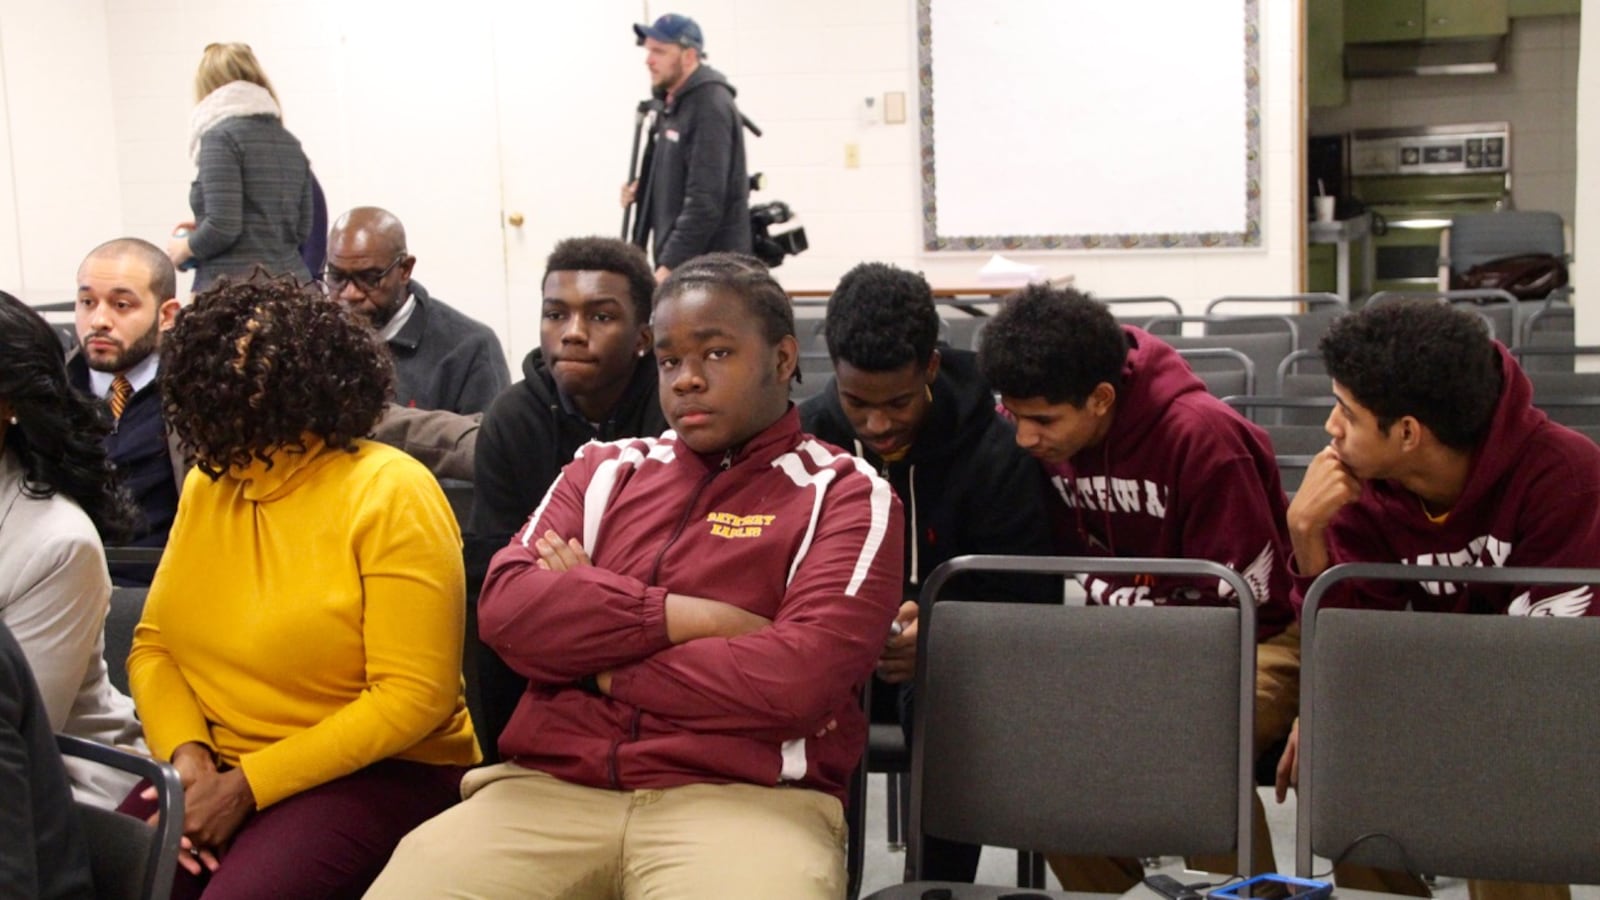 About a dozen Gateway University students and families were in attendance on Monday.